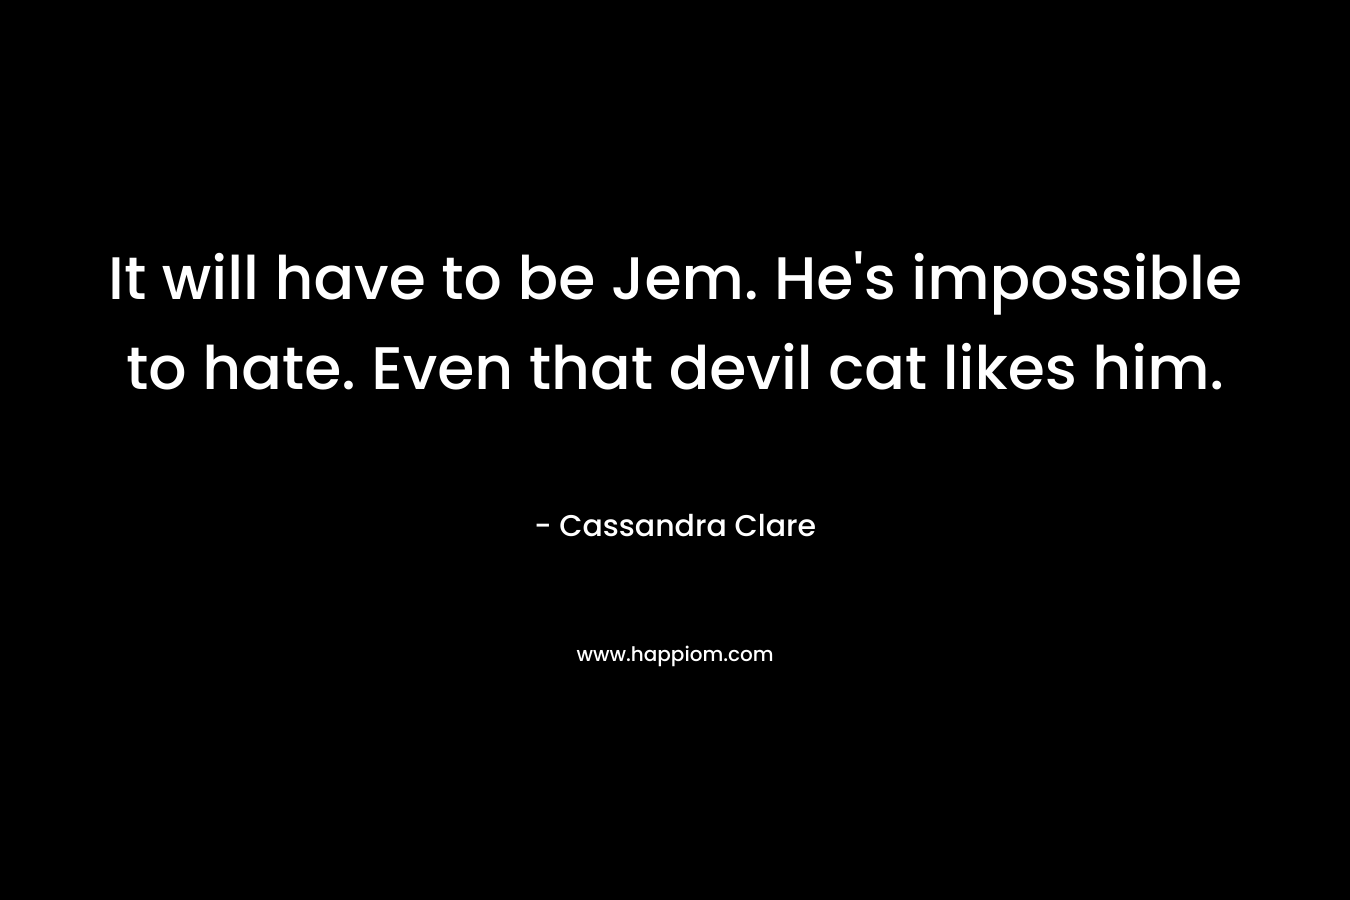 It will have to be Jem. He’s impossible to hate. Even that devil cat likes him. – Cassandra Clare